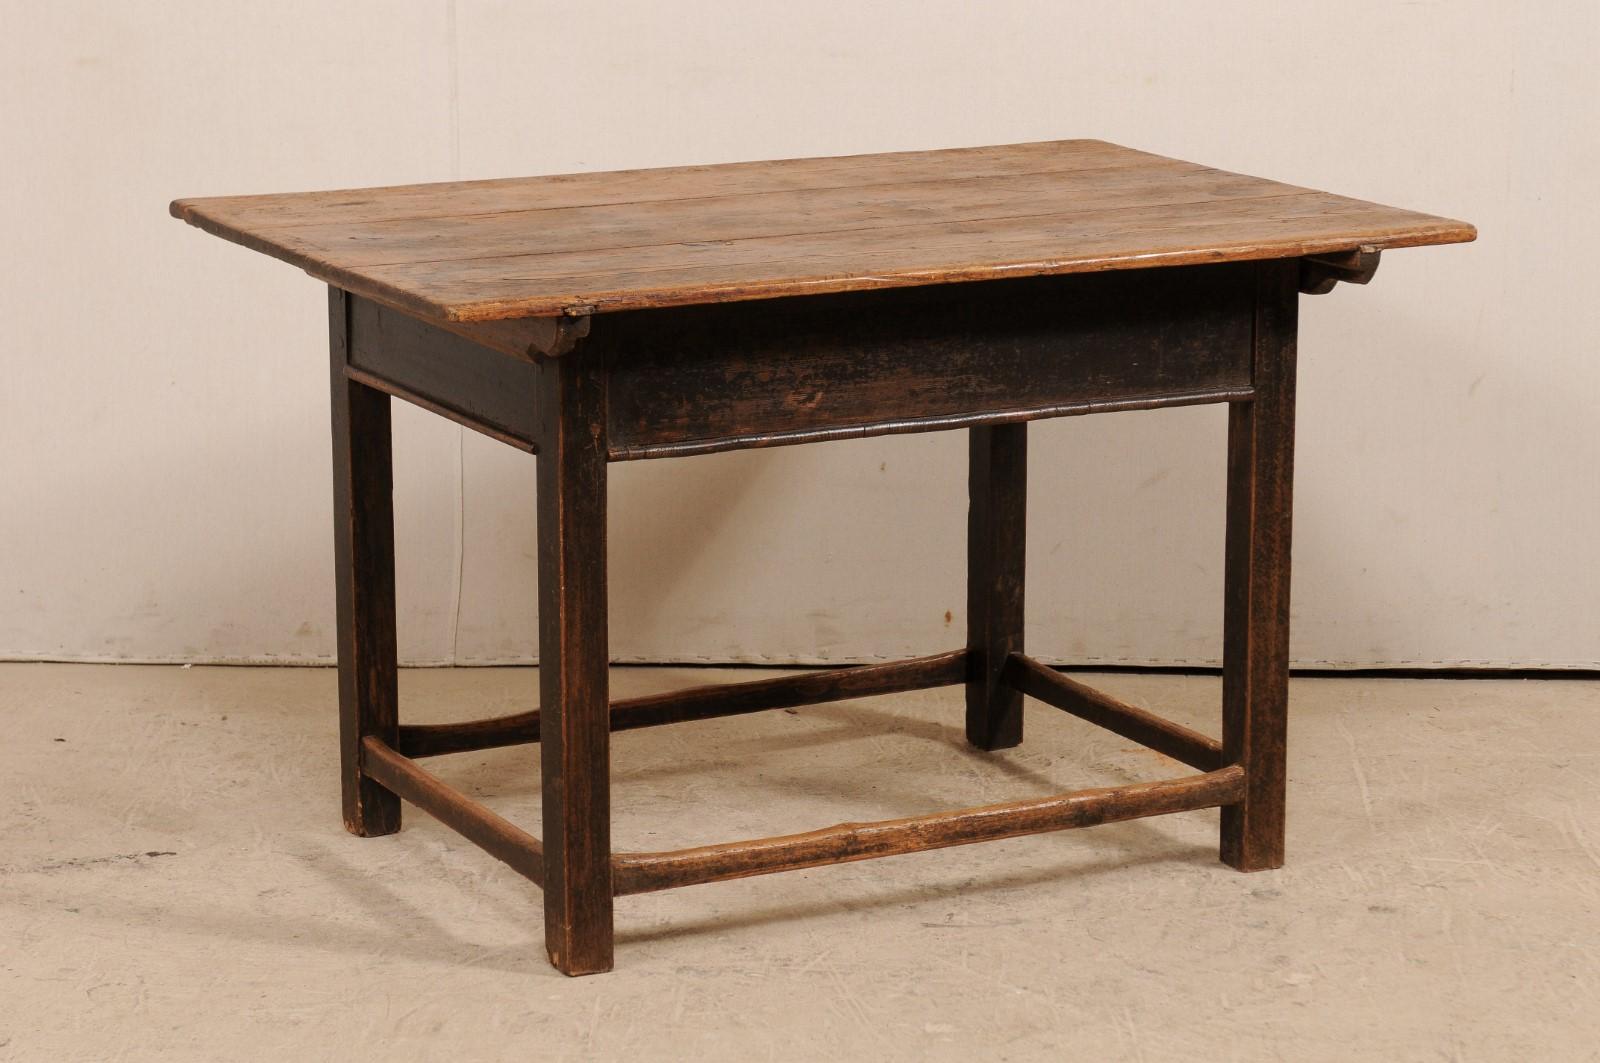 A French 19th century wood occasional table. This antique table from France is rustic and inviting with its beautifully aged, natural wood top, and base which has remnants of its original paint. The rectangular-shaped top overhangs the plain but